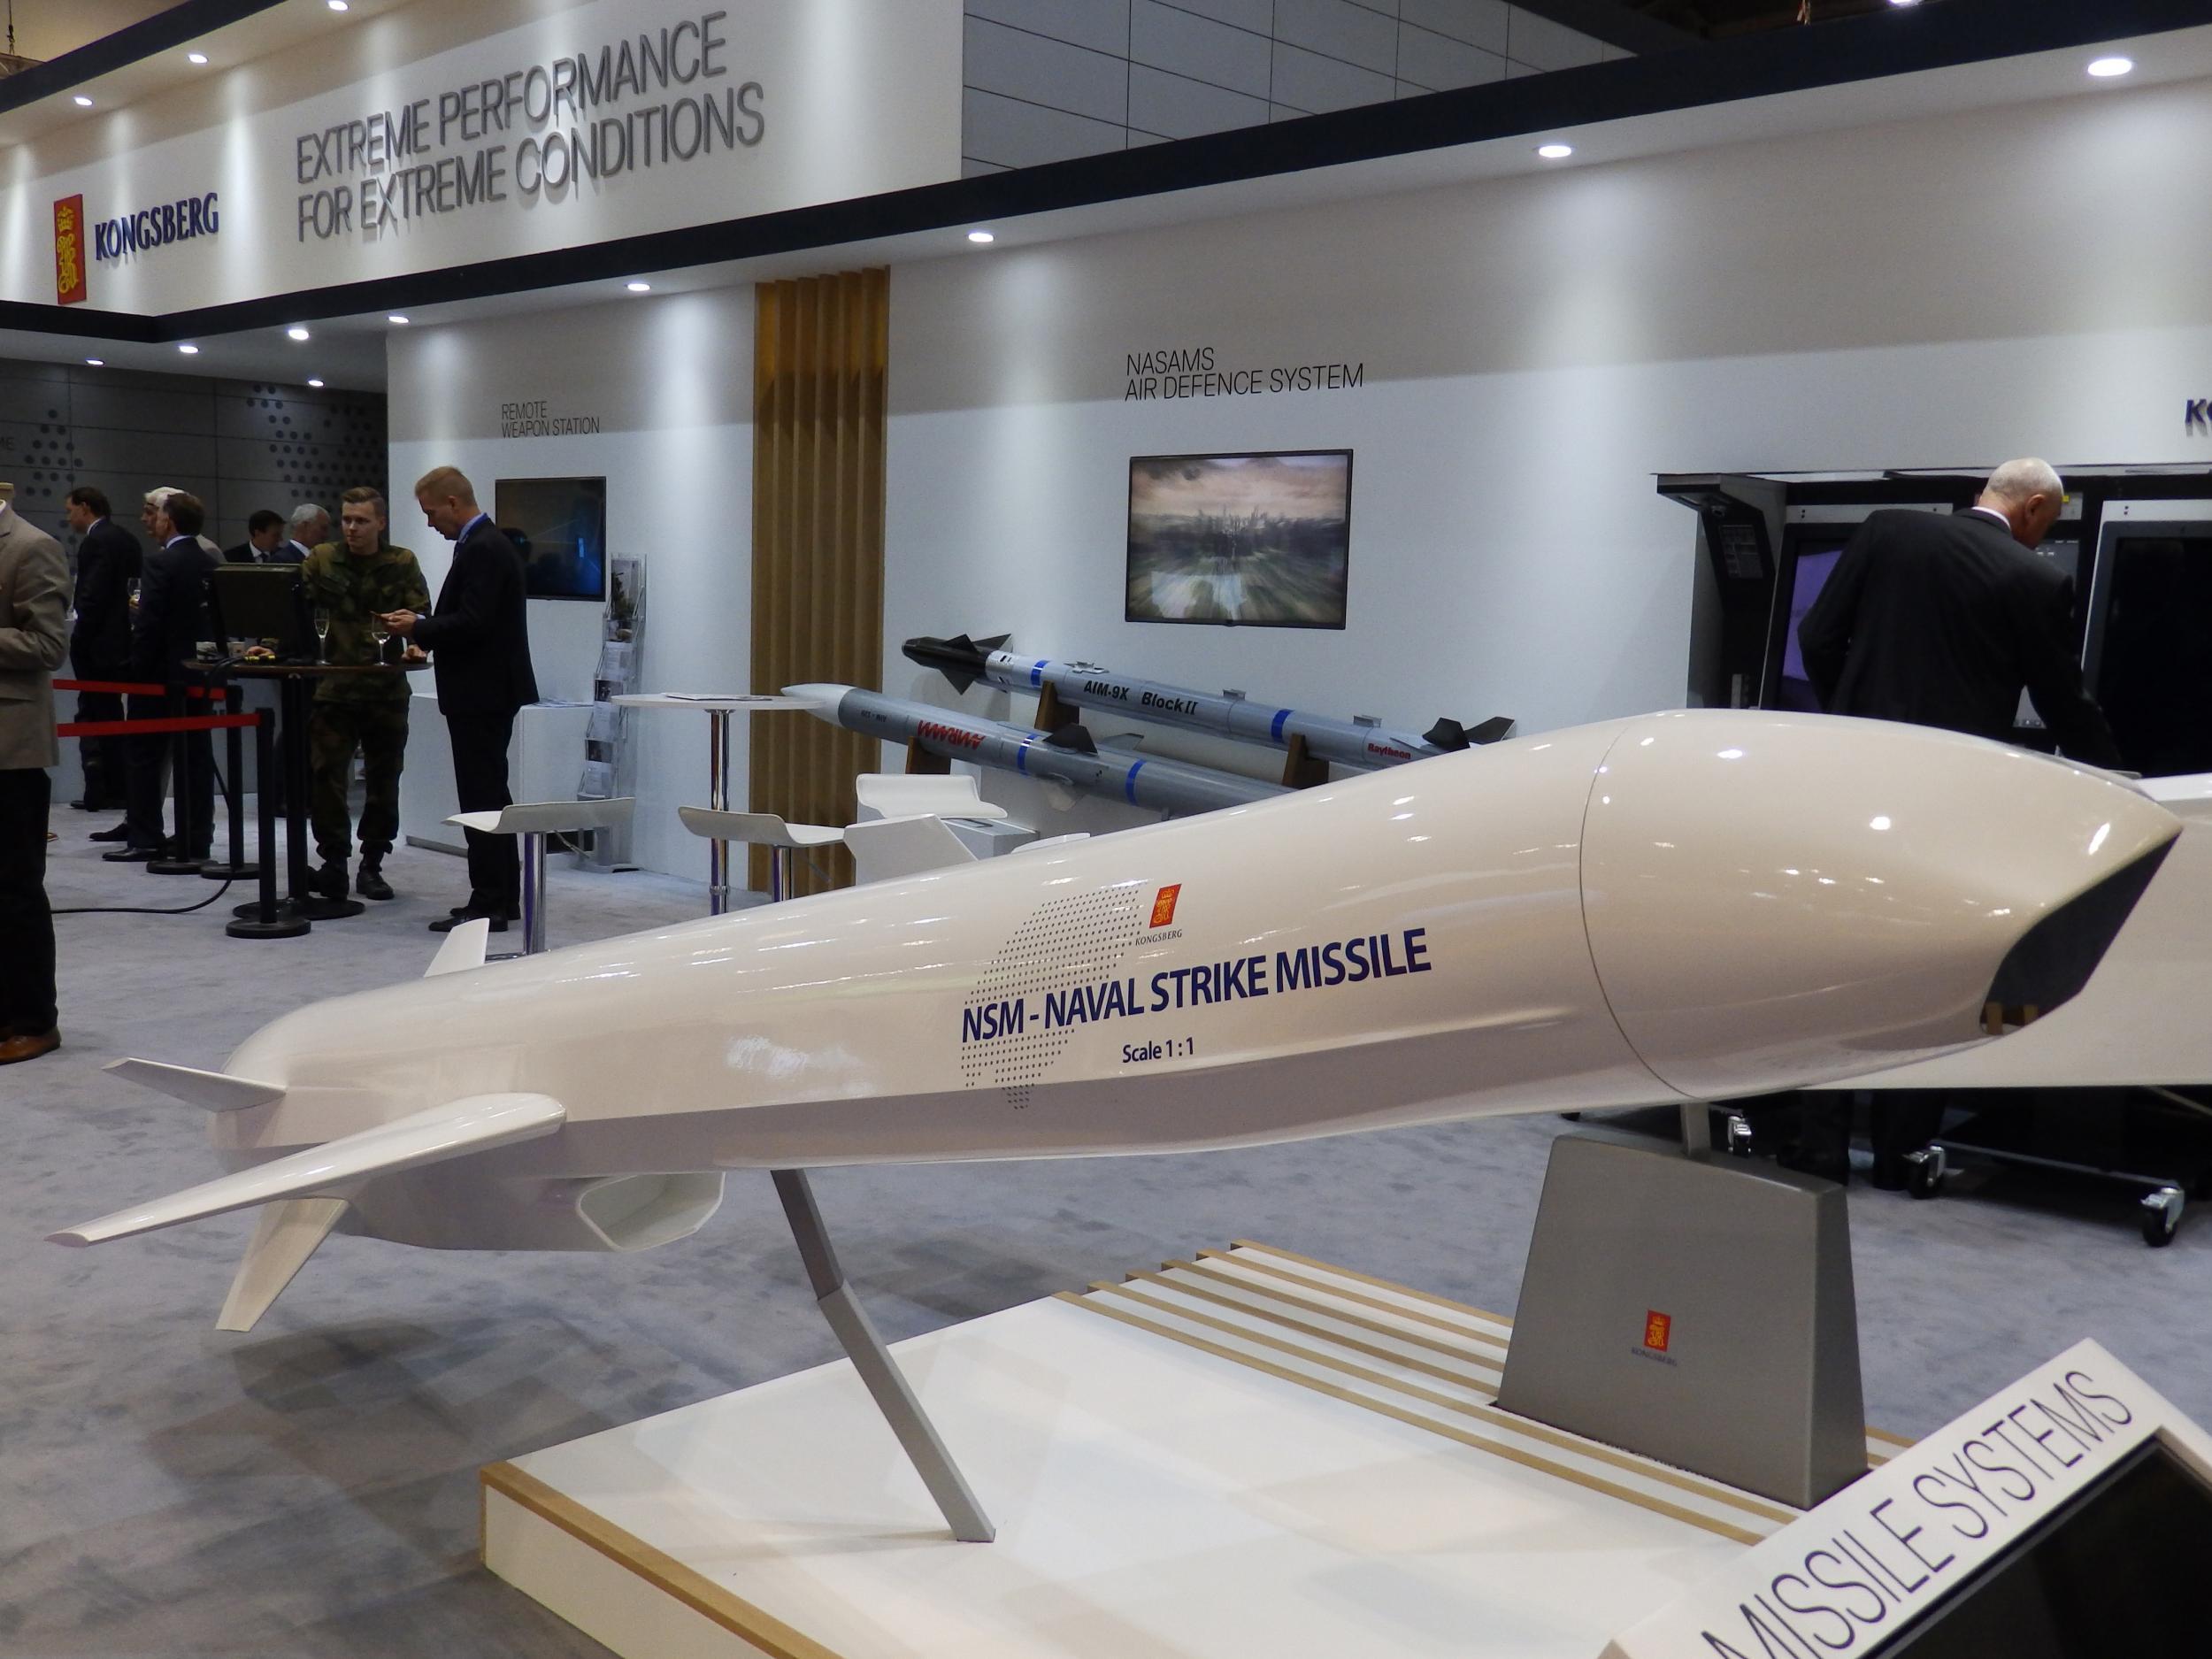 Ministers championed the arms trade at the DSEI arms fair in London